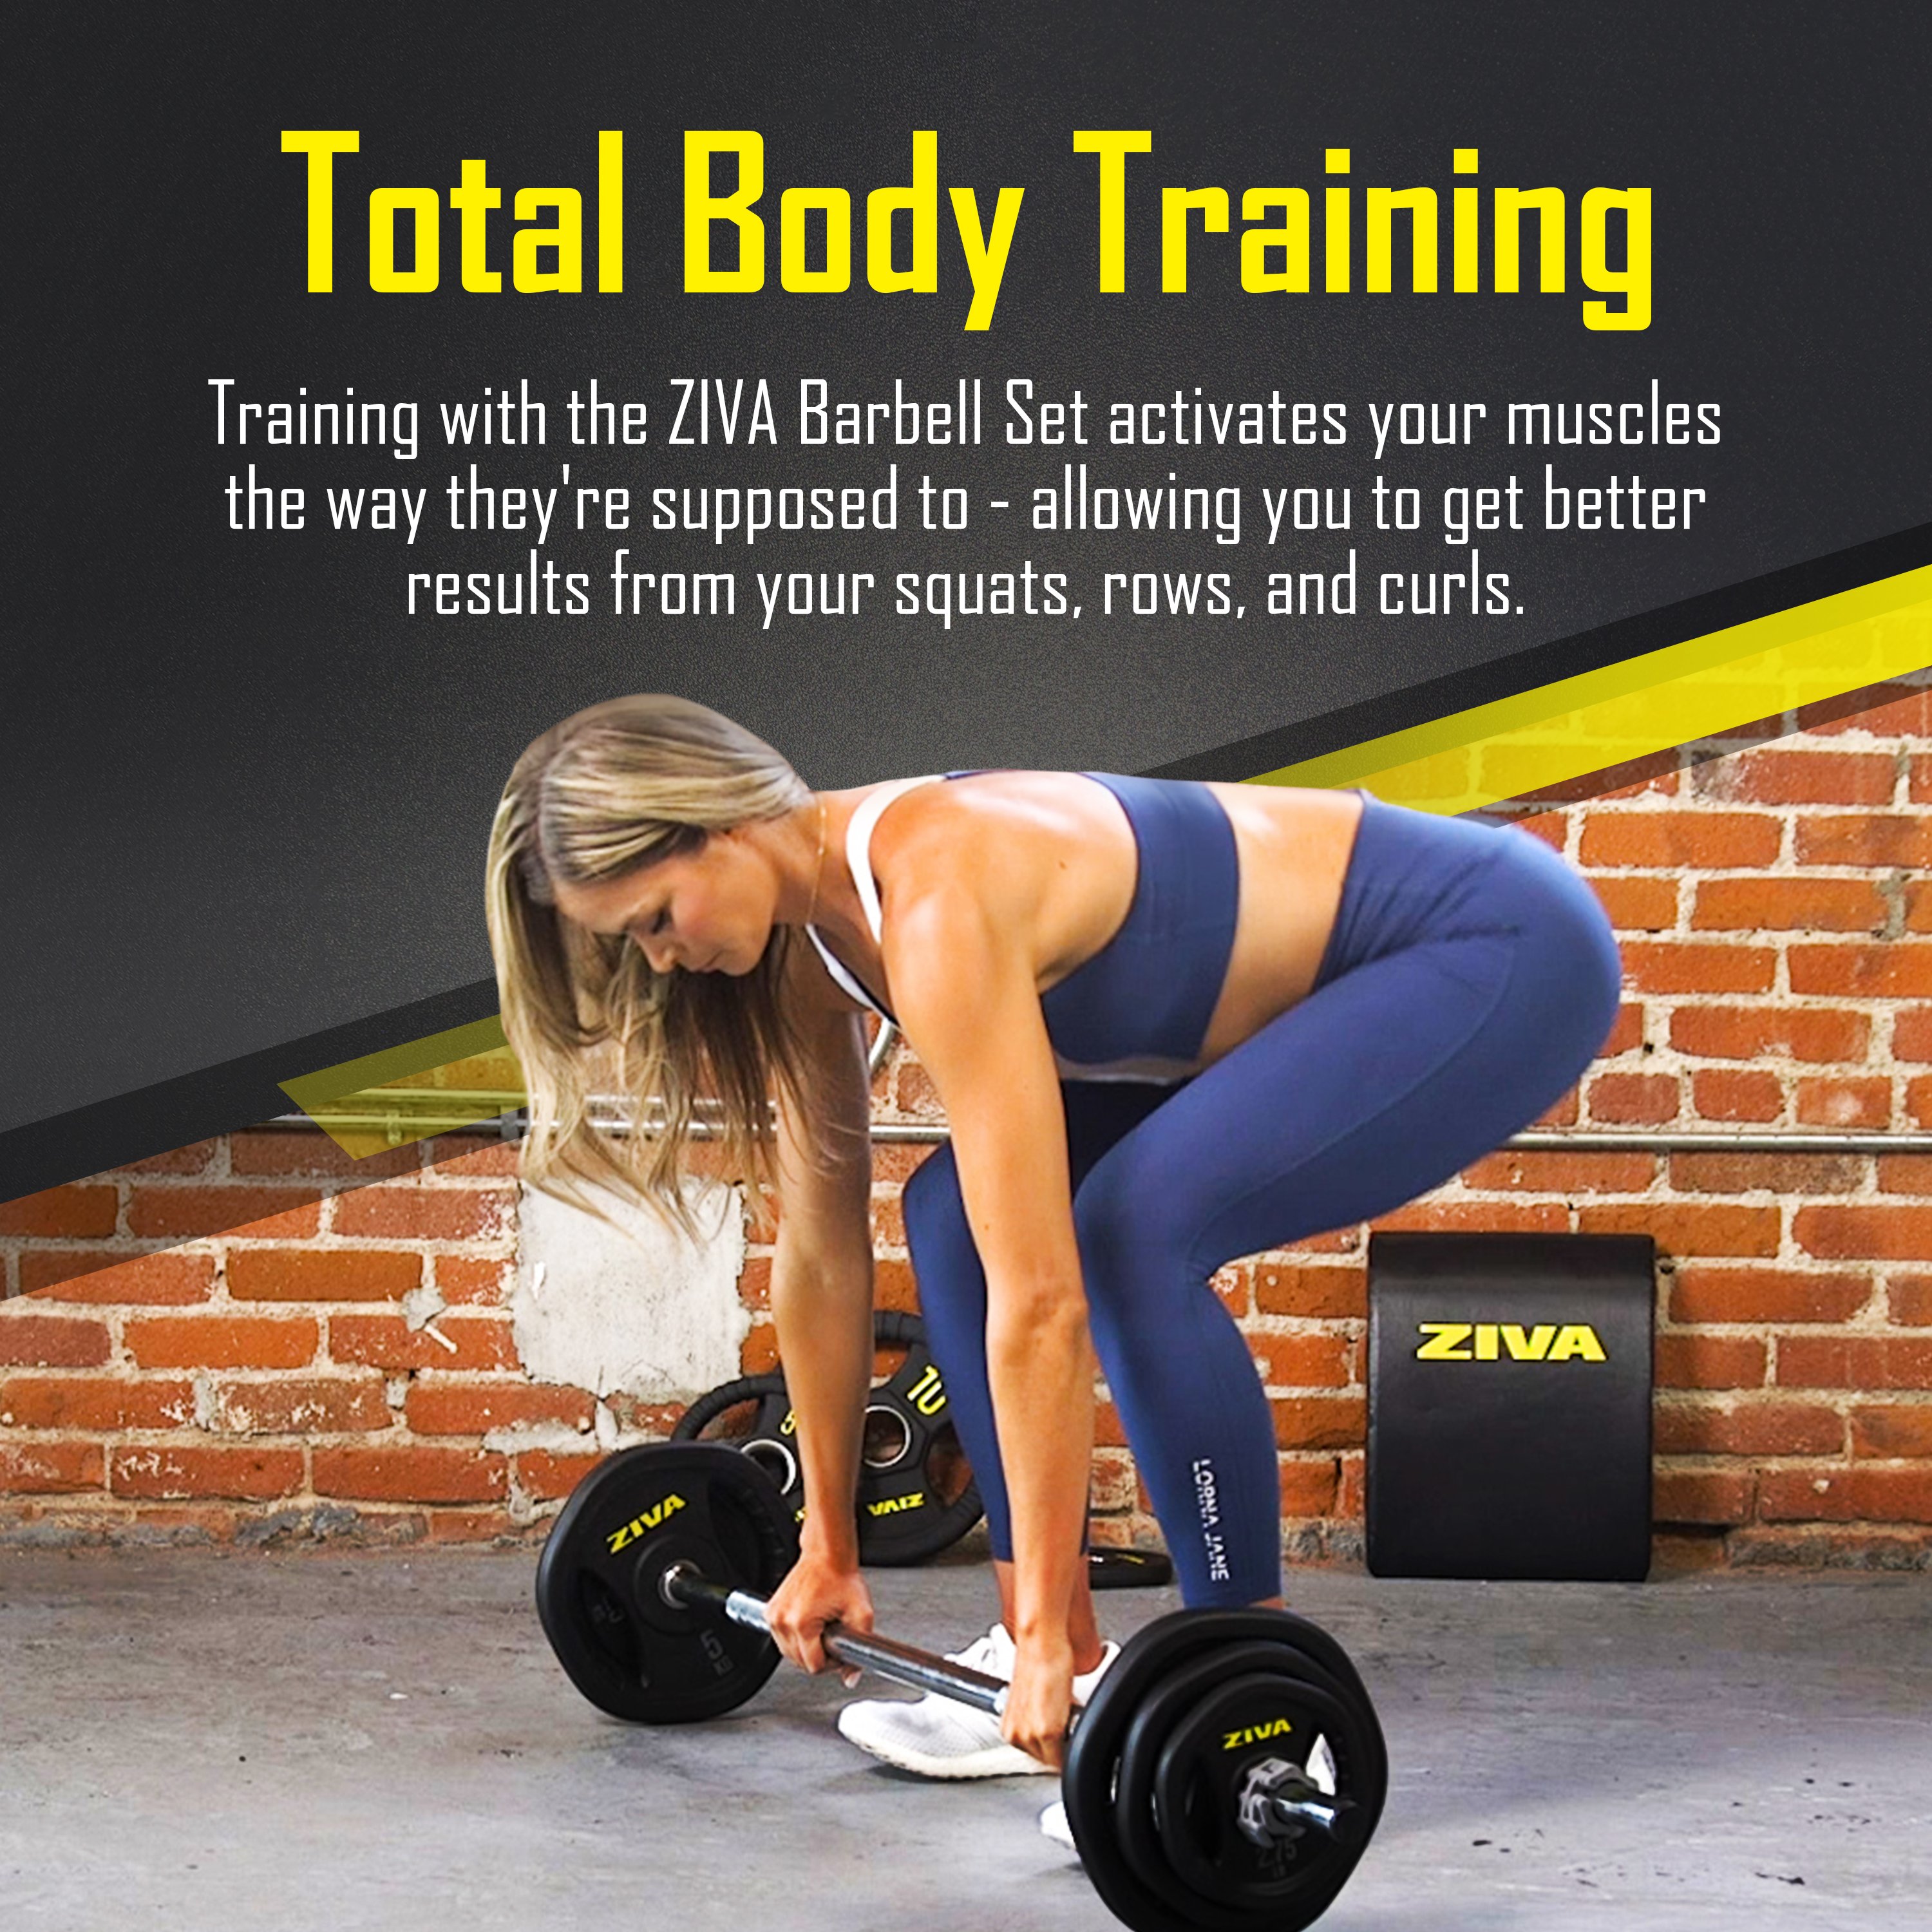 Total body training. Training with the ZIVA barbell set activates your muscles the way they are supposed to - allowing you to get better results from your squats, rows, and curls.